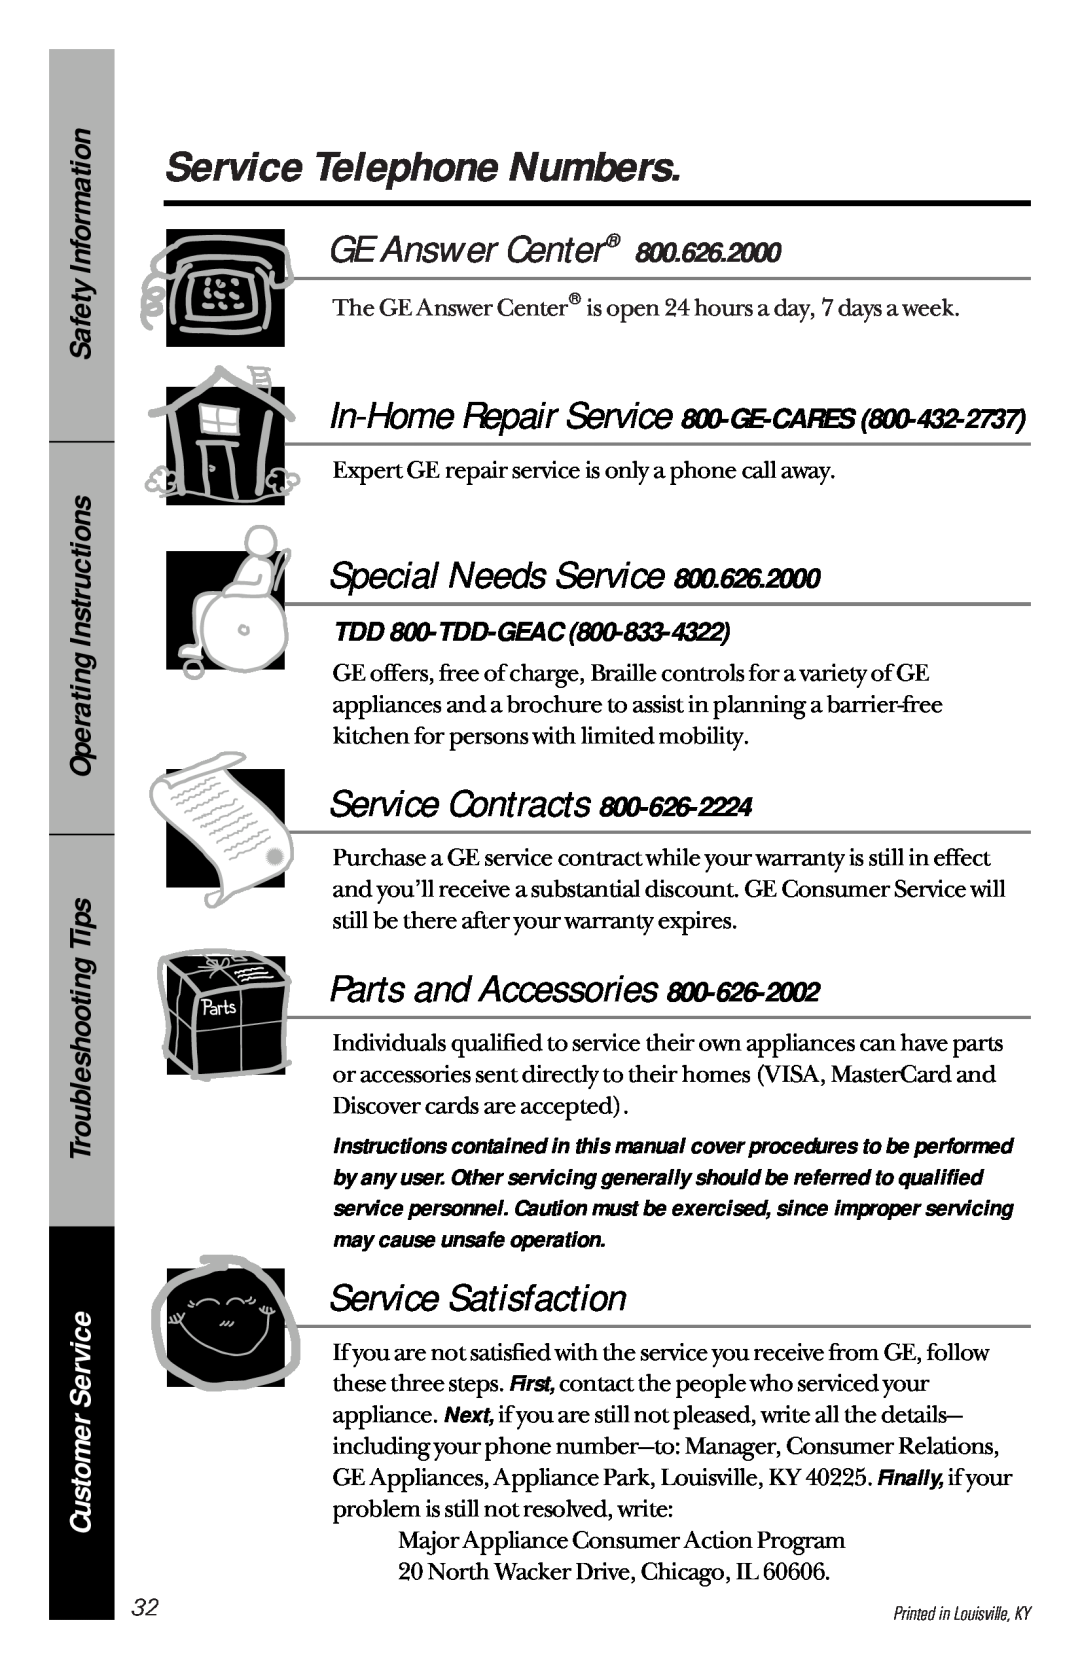 Hotpoint HDA2120, HDA2130 Service Telephone Numbers, Safety Information Operating Instructions Troubleshooting Tips 